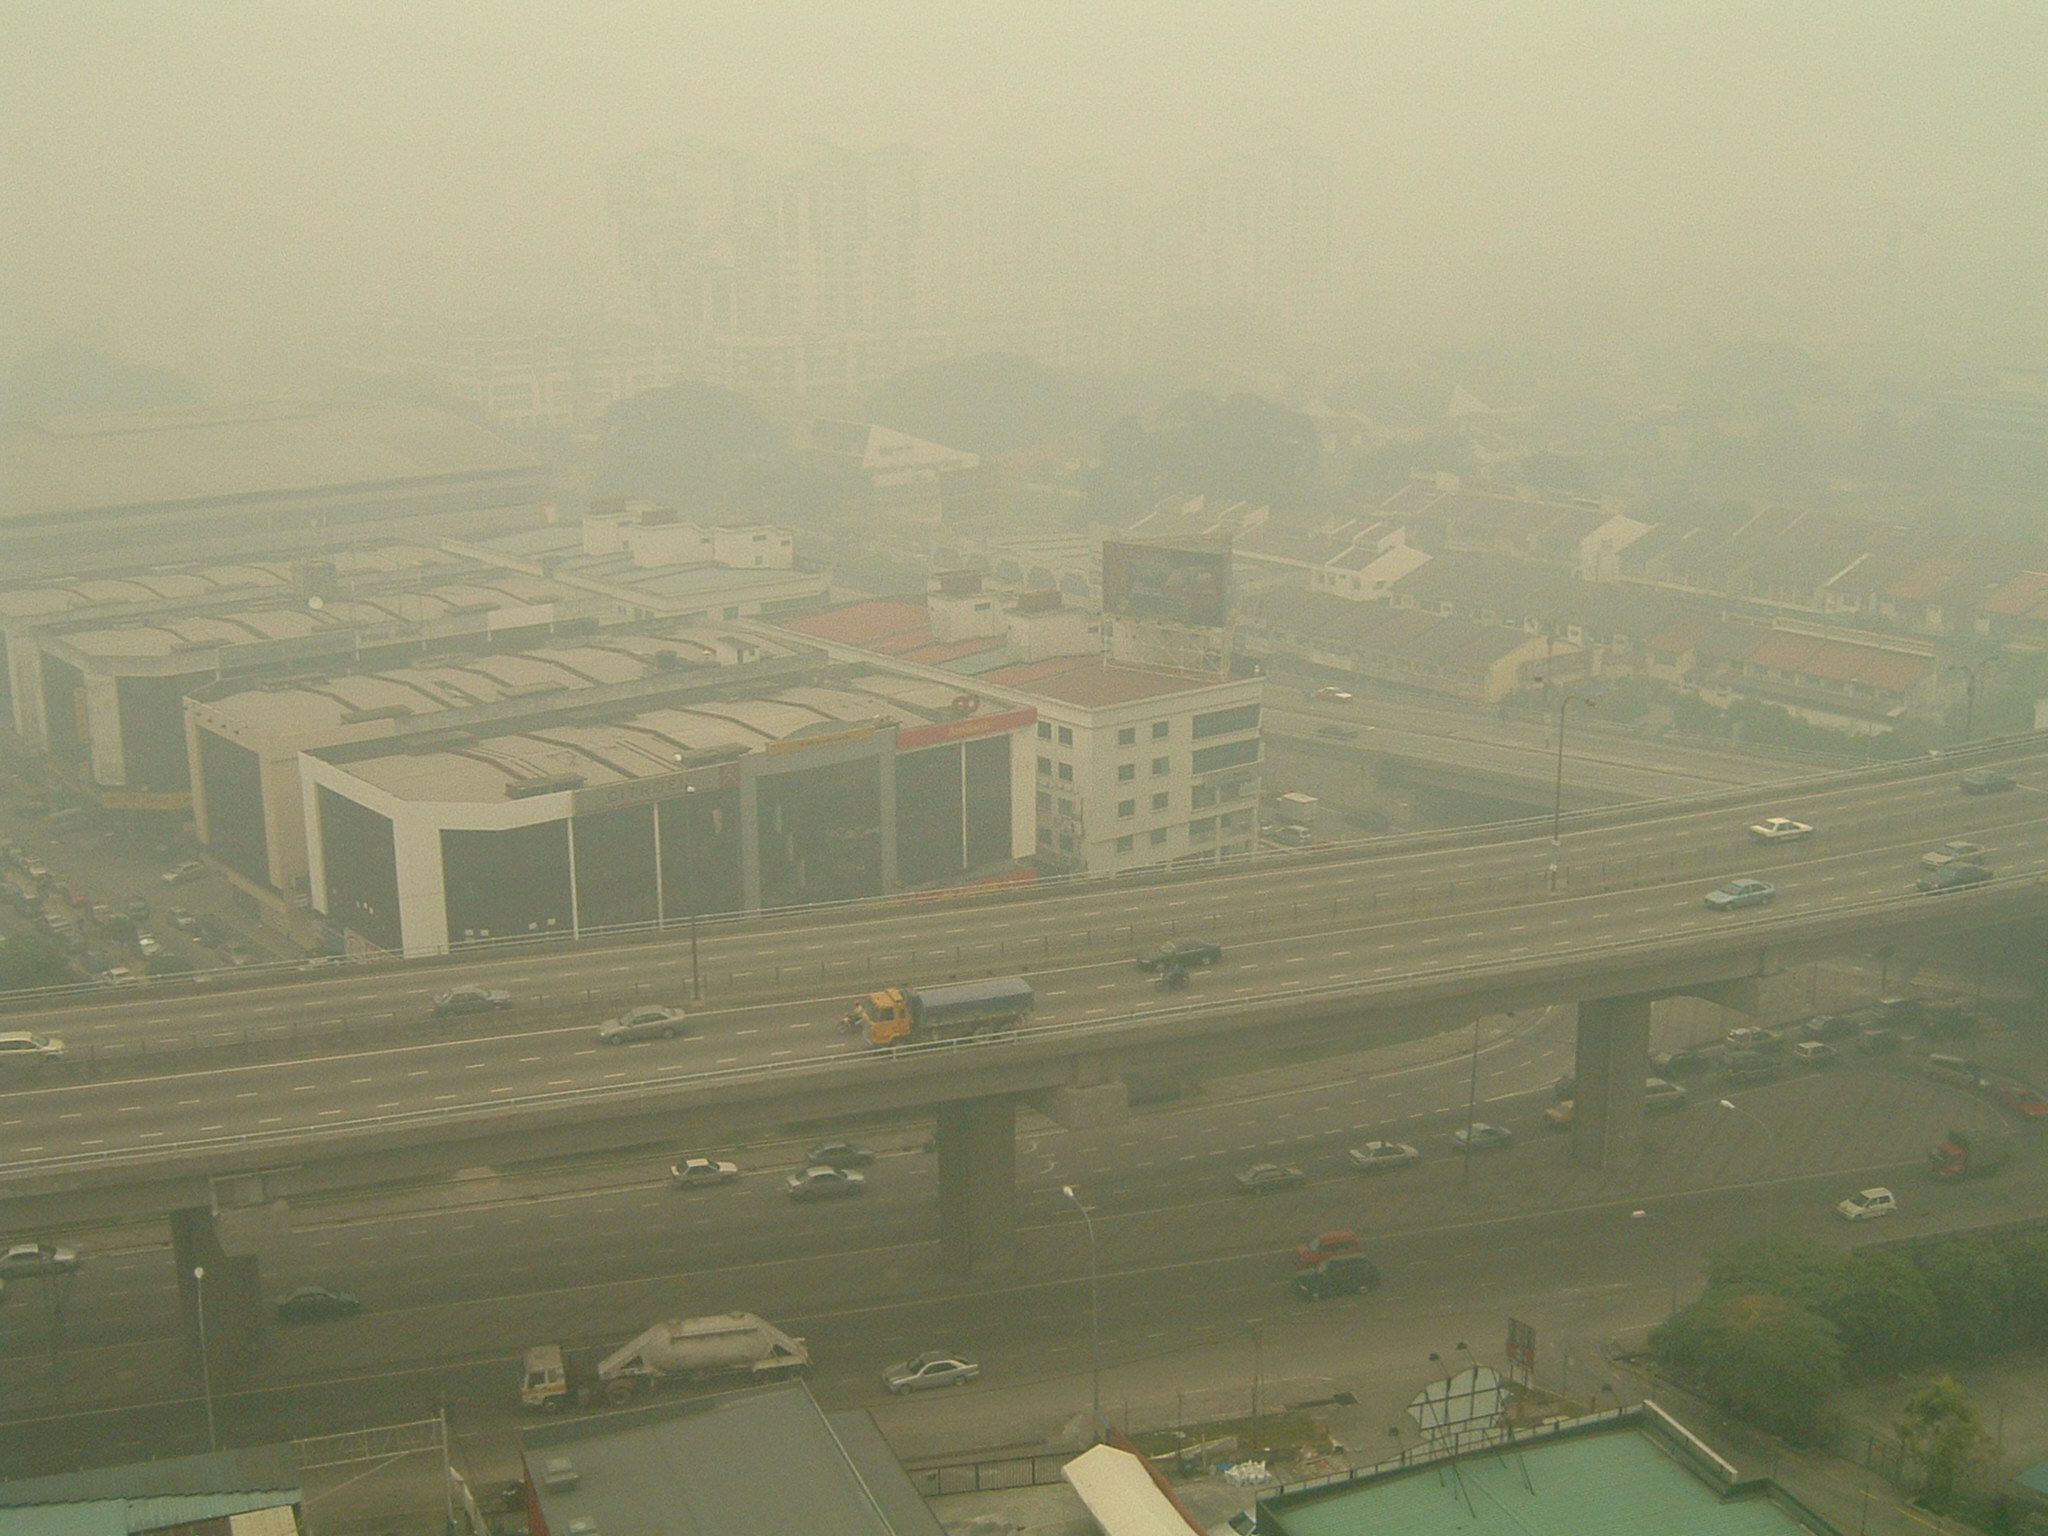 land-clearing-fires-in-the-neighbouring-countries-polluting-air-in-malaysia